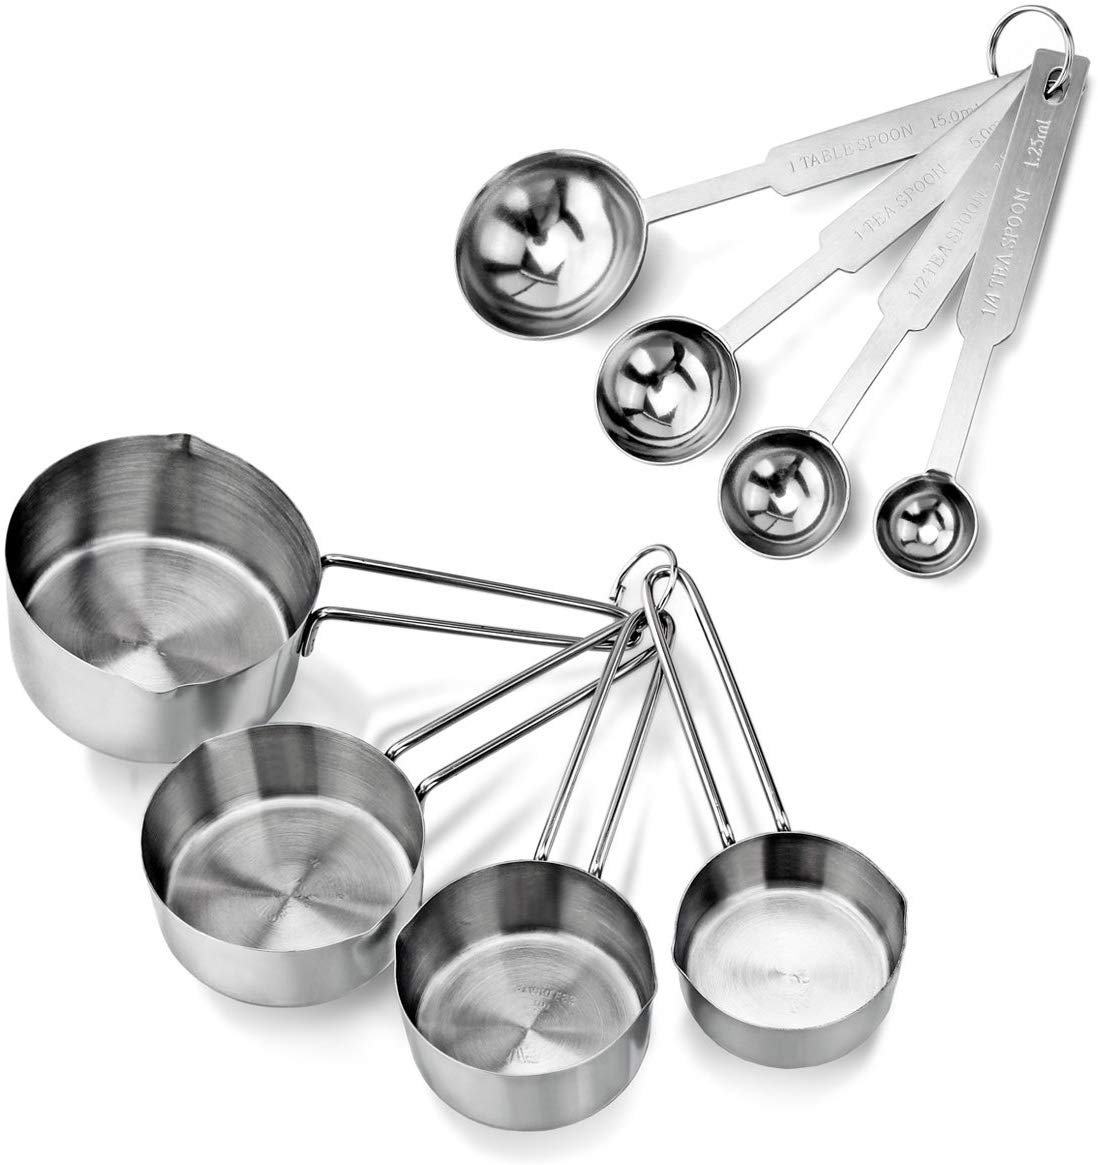 New Star Measuring Spoons and Cups